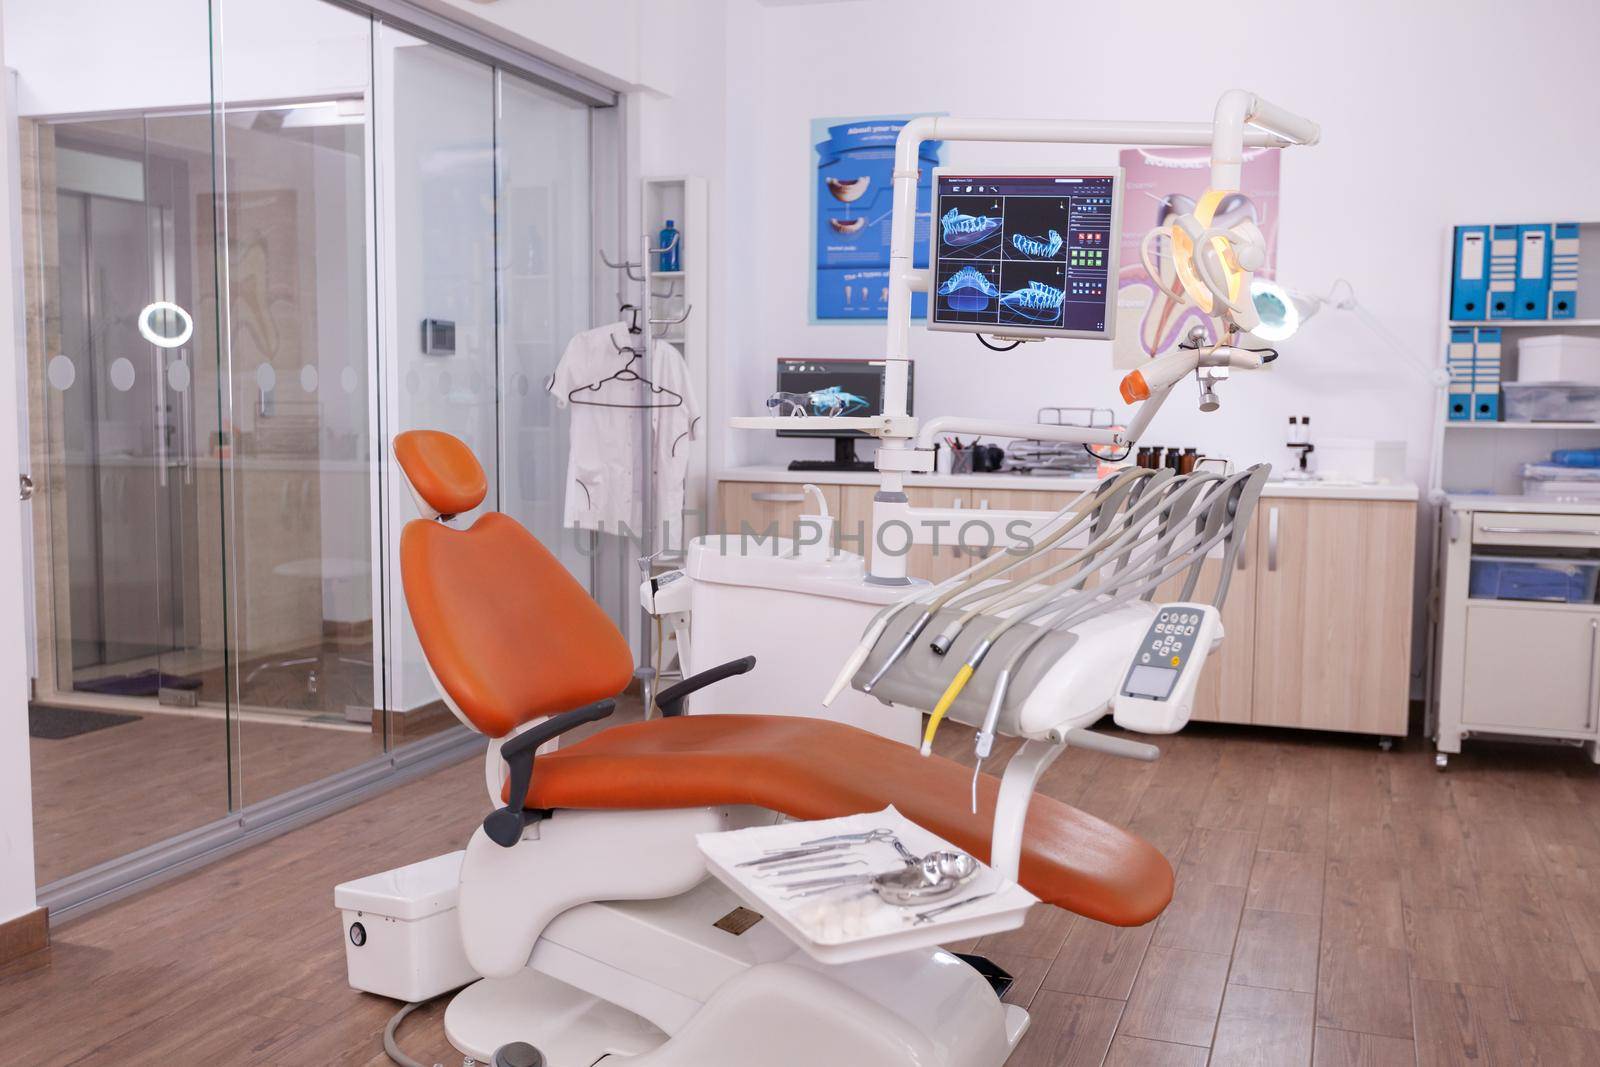 Empty dentistry orthodontist stomatology office with nobody in it. Light modern equipped stomatology workplace, teeth hygiene and care. Hospital dental health. Tooth xray image on monitor